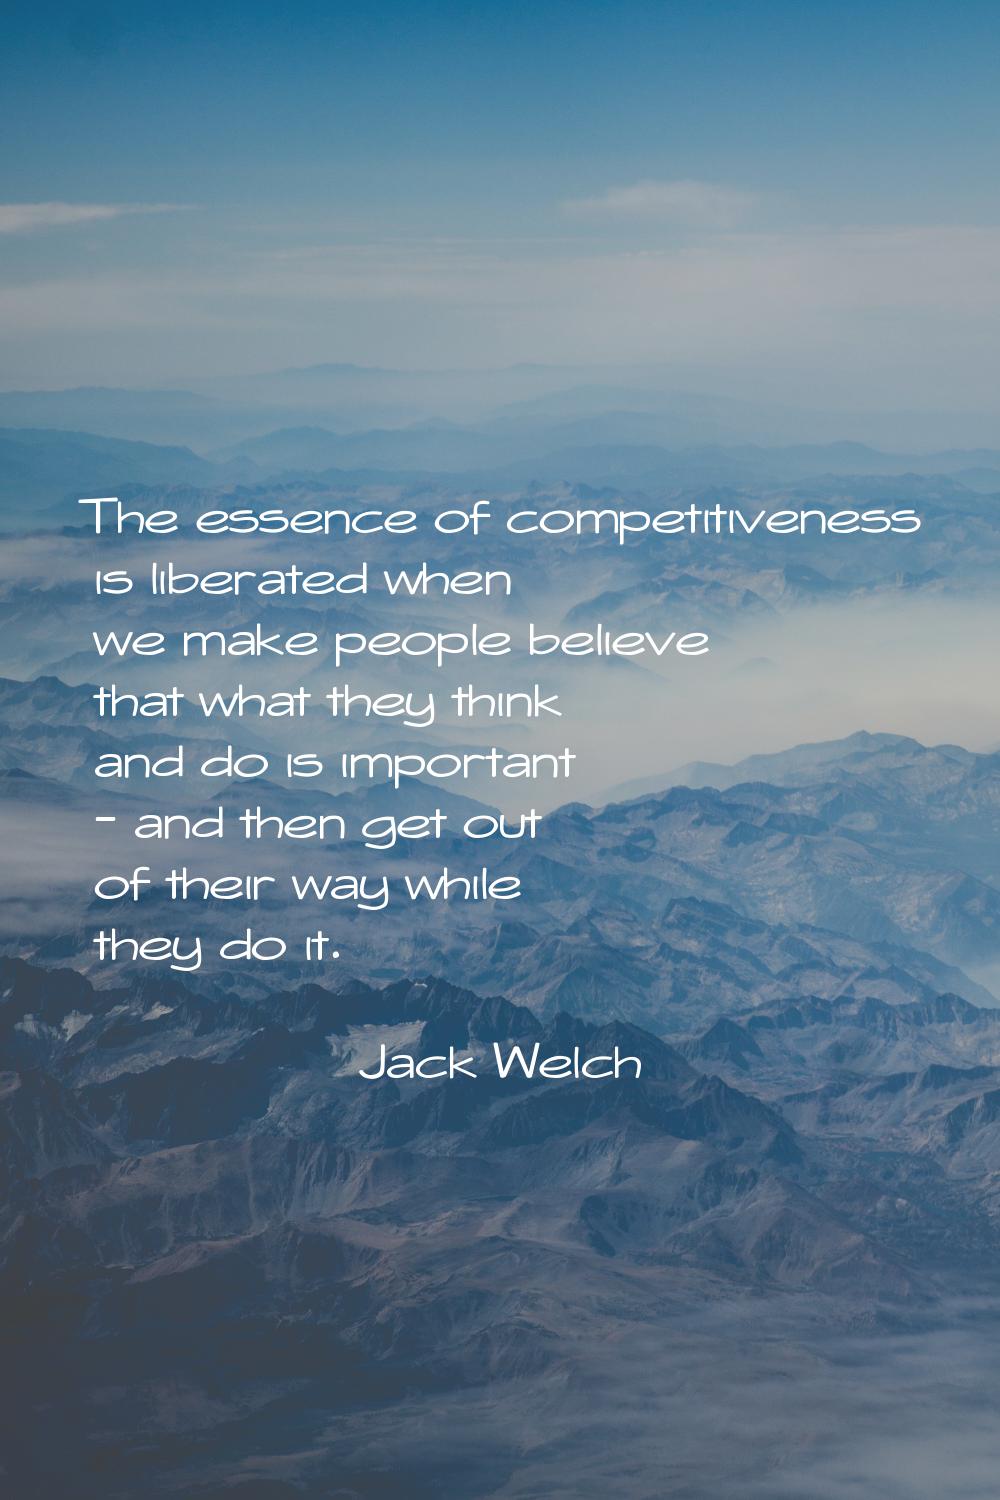 The essence of competitiveness is liberated when we make people believe that what they think and do